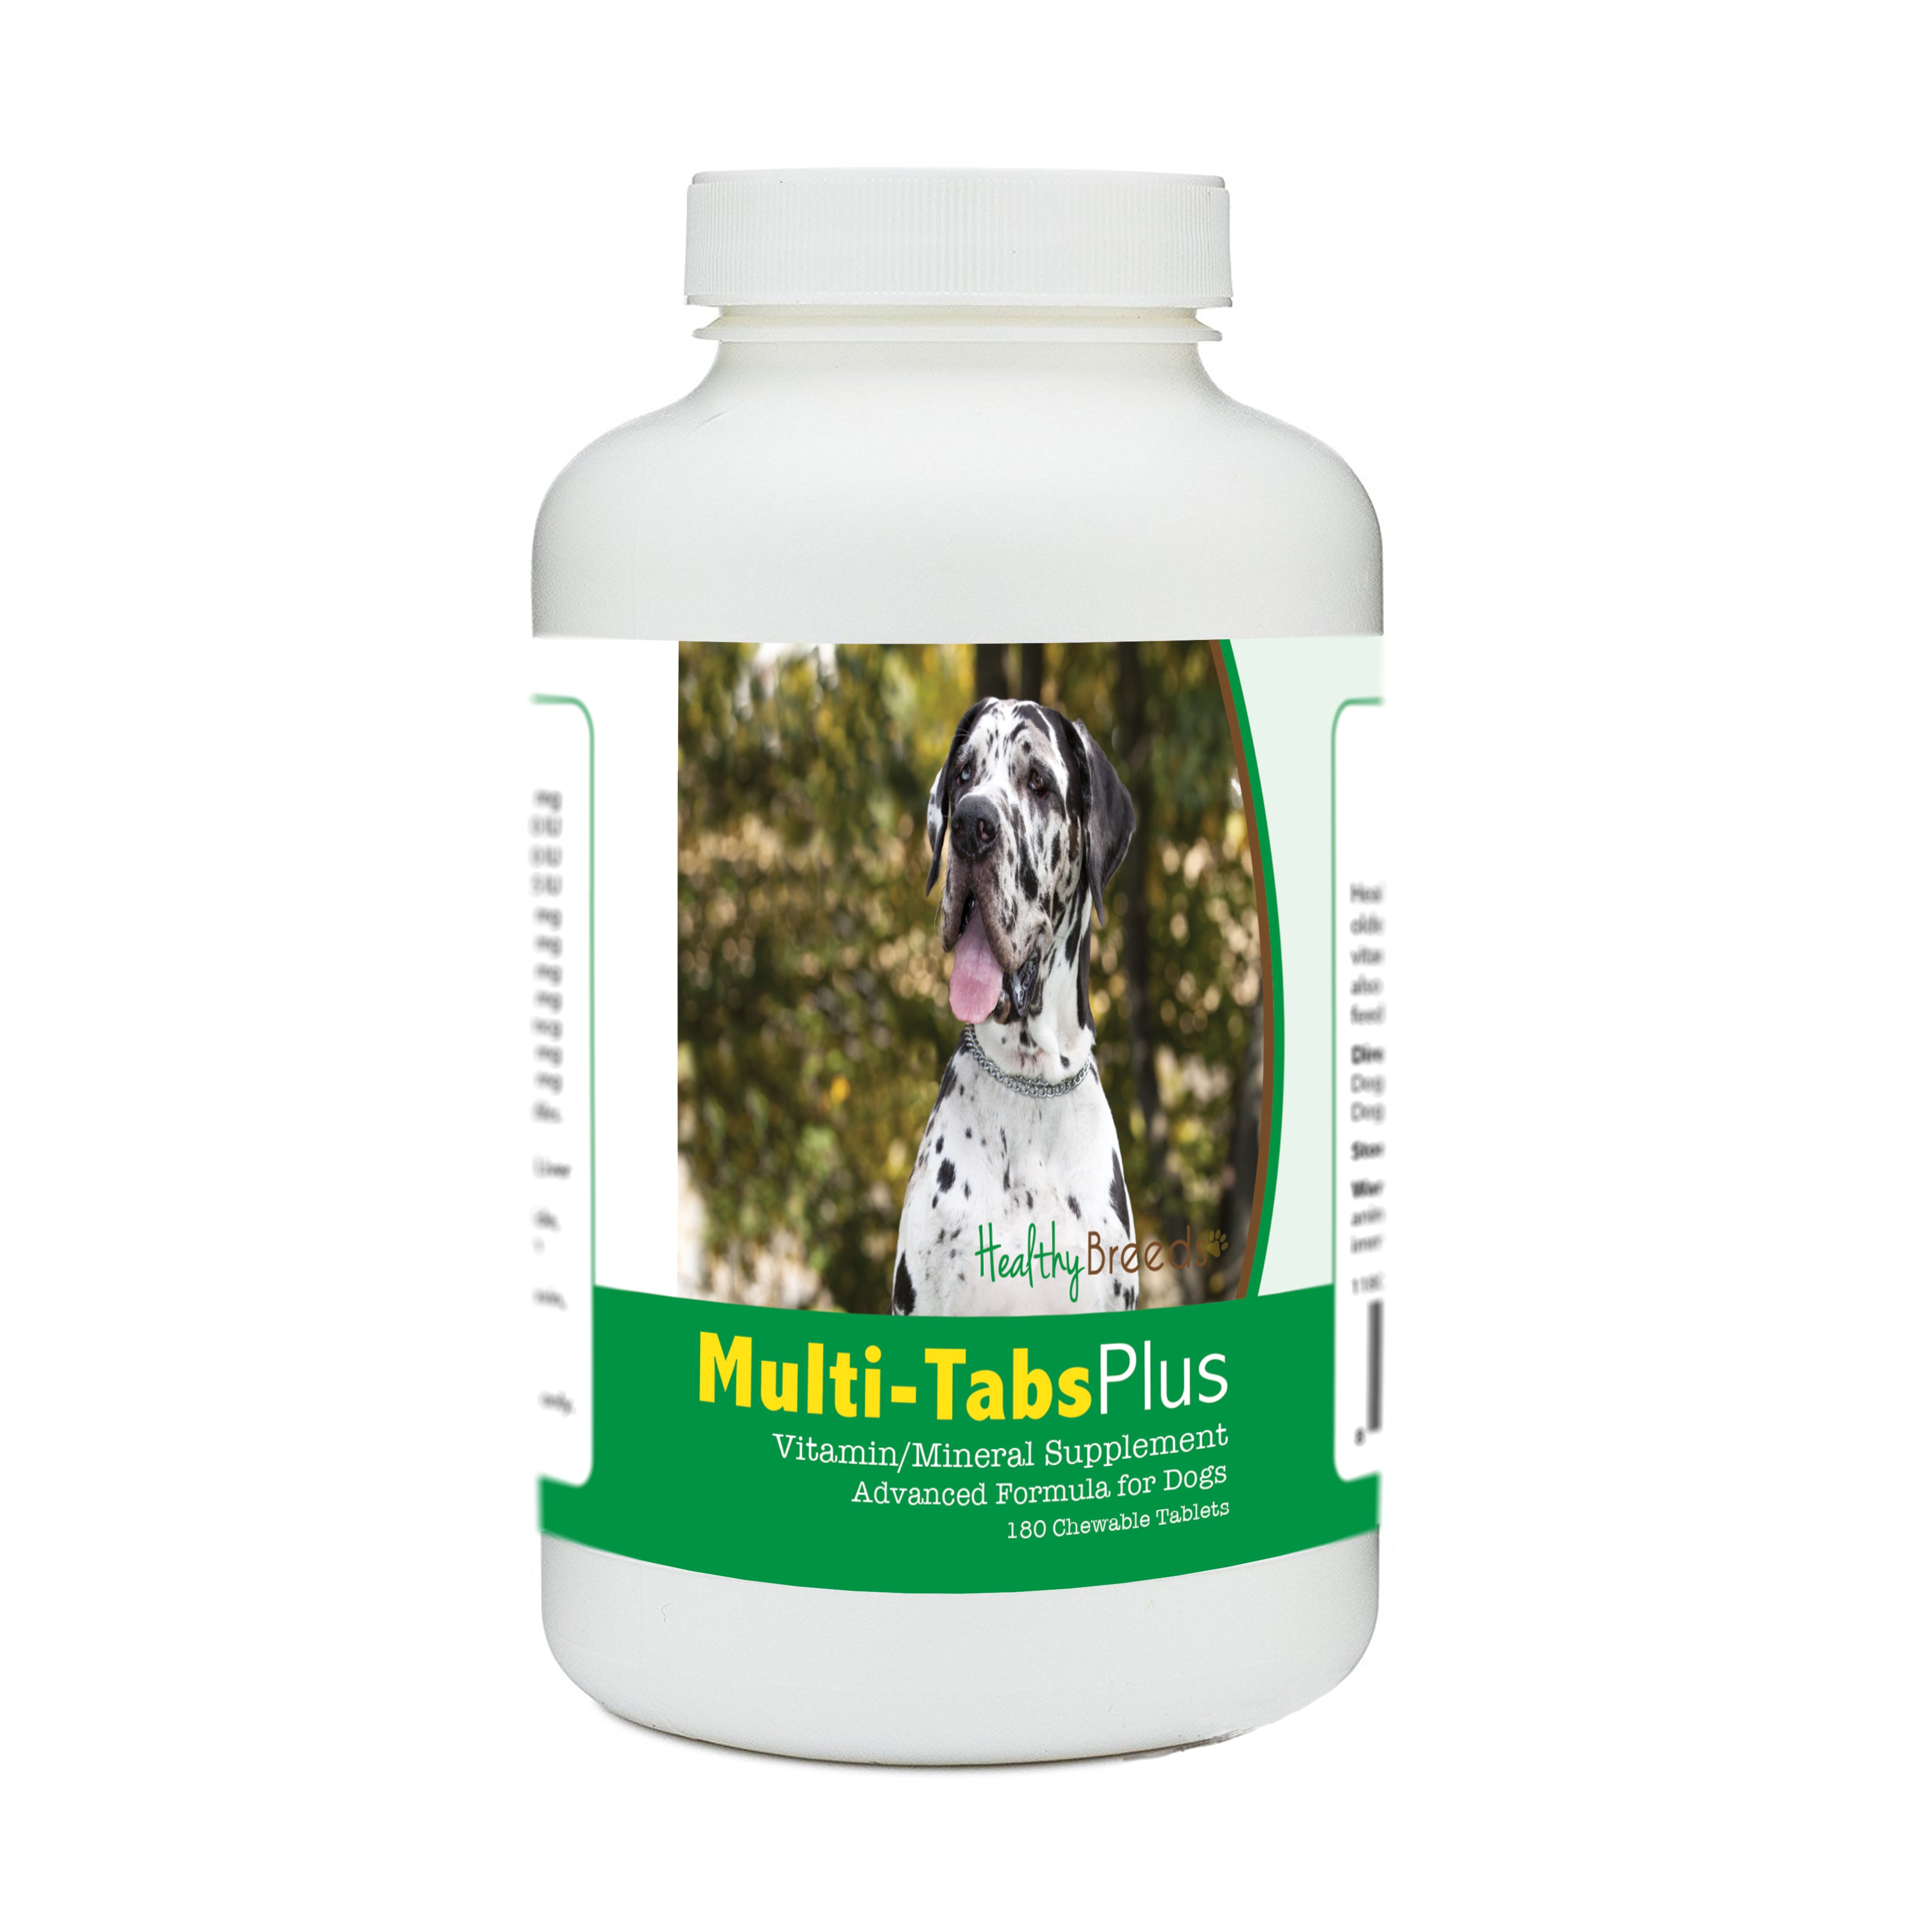 Great Dane Multi-Tabs Plus Chewable Tablets 180 Count